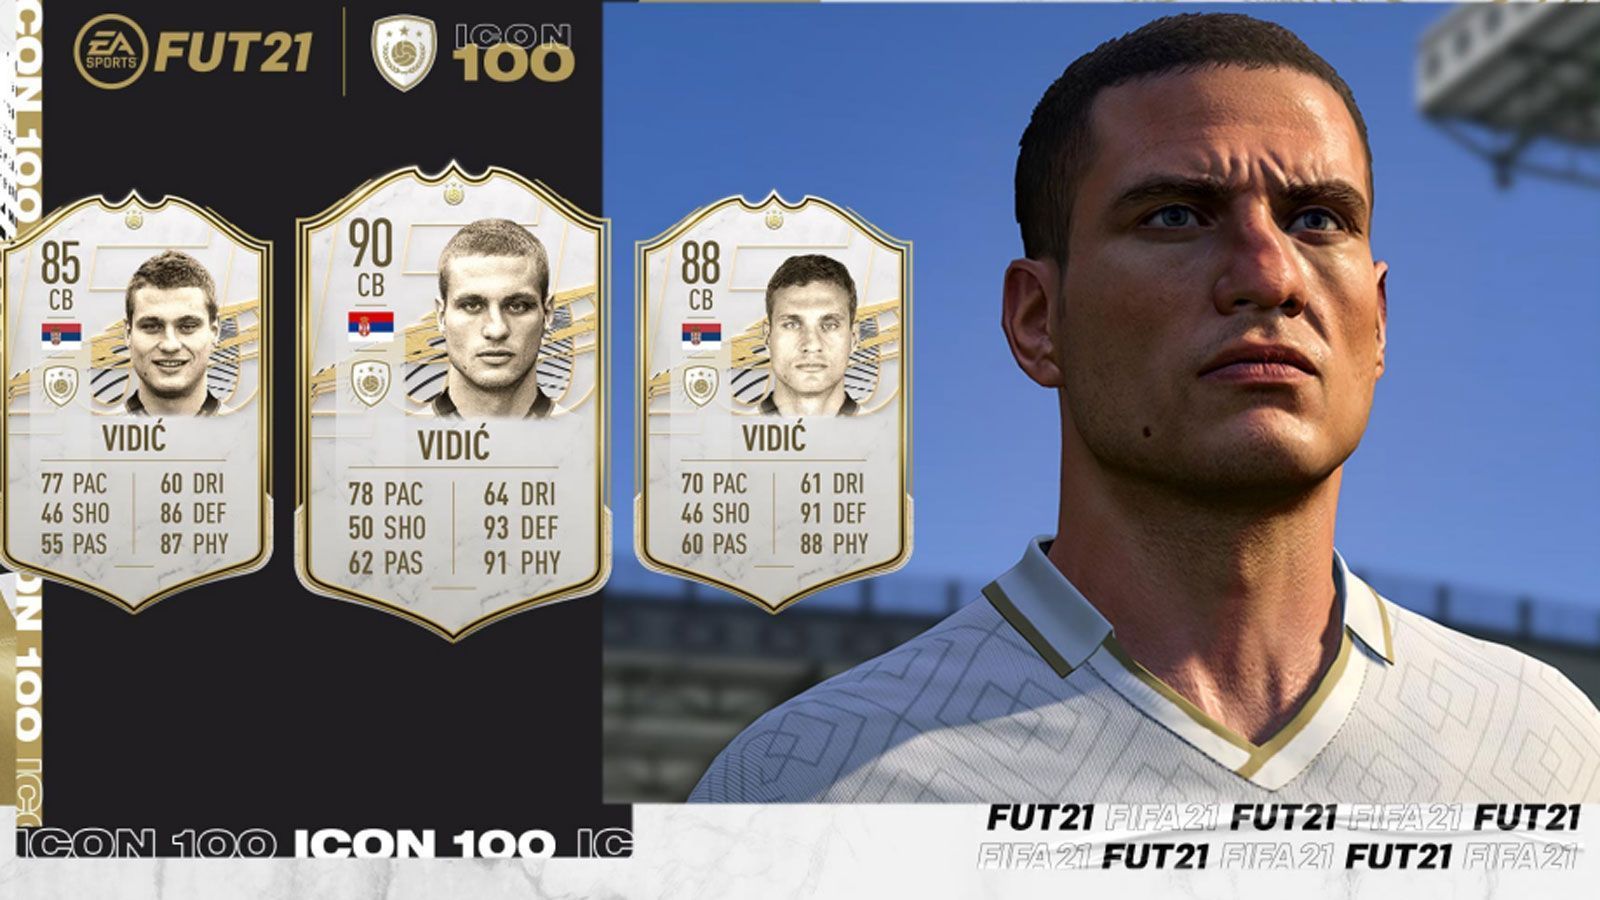 
                <strong>Nemanja Vidic</strong><br>
                Position: InnenverteidigungBasis-Icon-Rating: 85Mid-Icon-Rating: 88Prime-Icon-Rating: 90
              